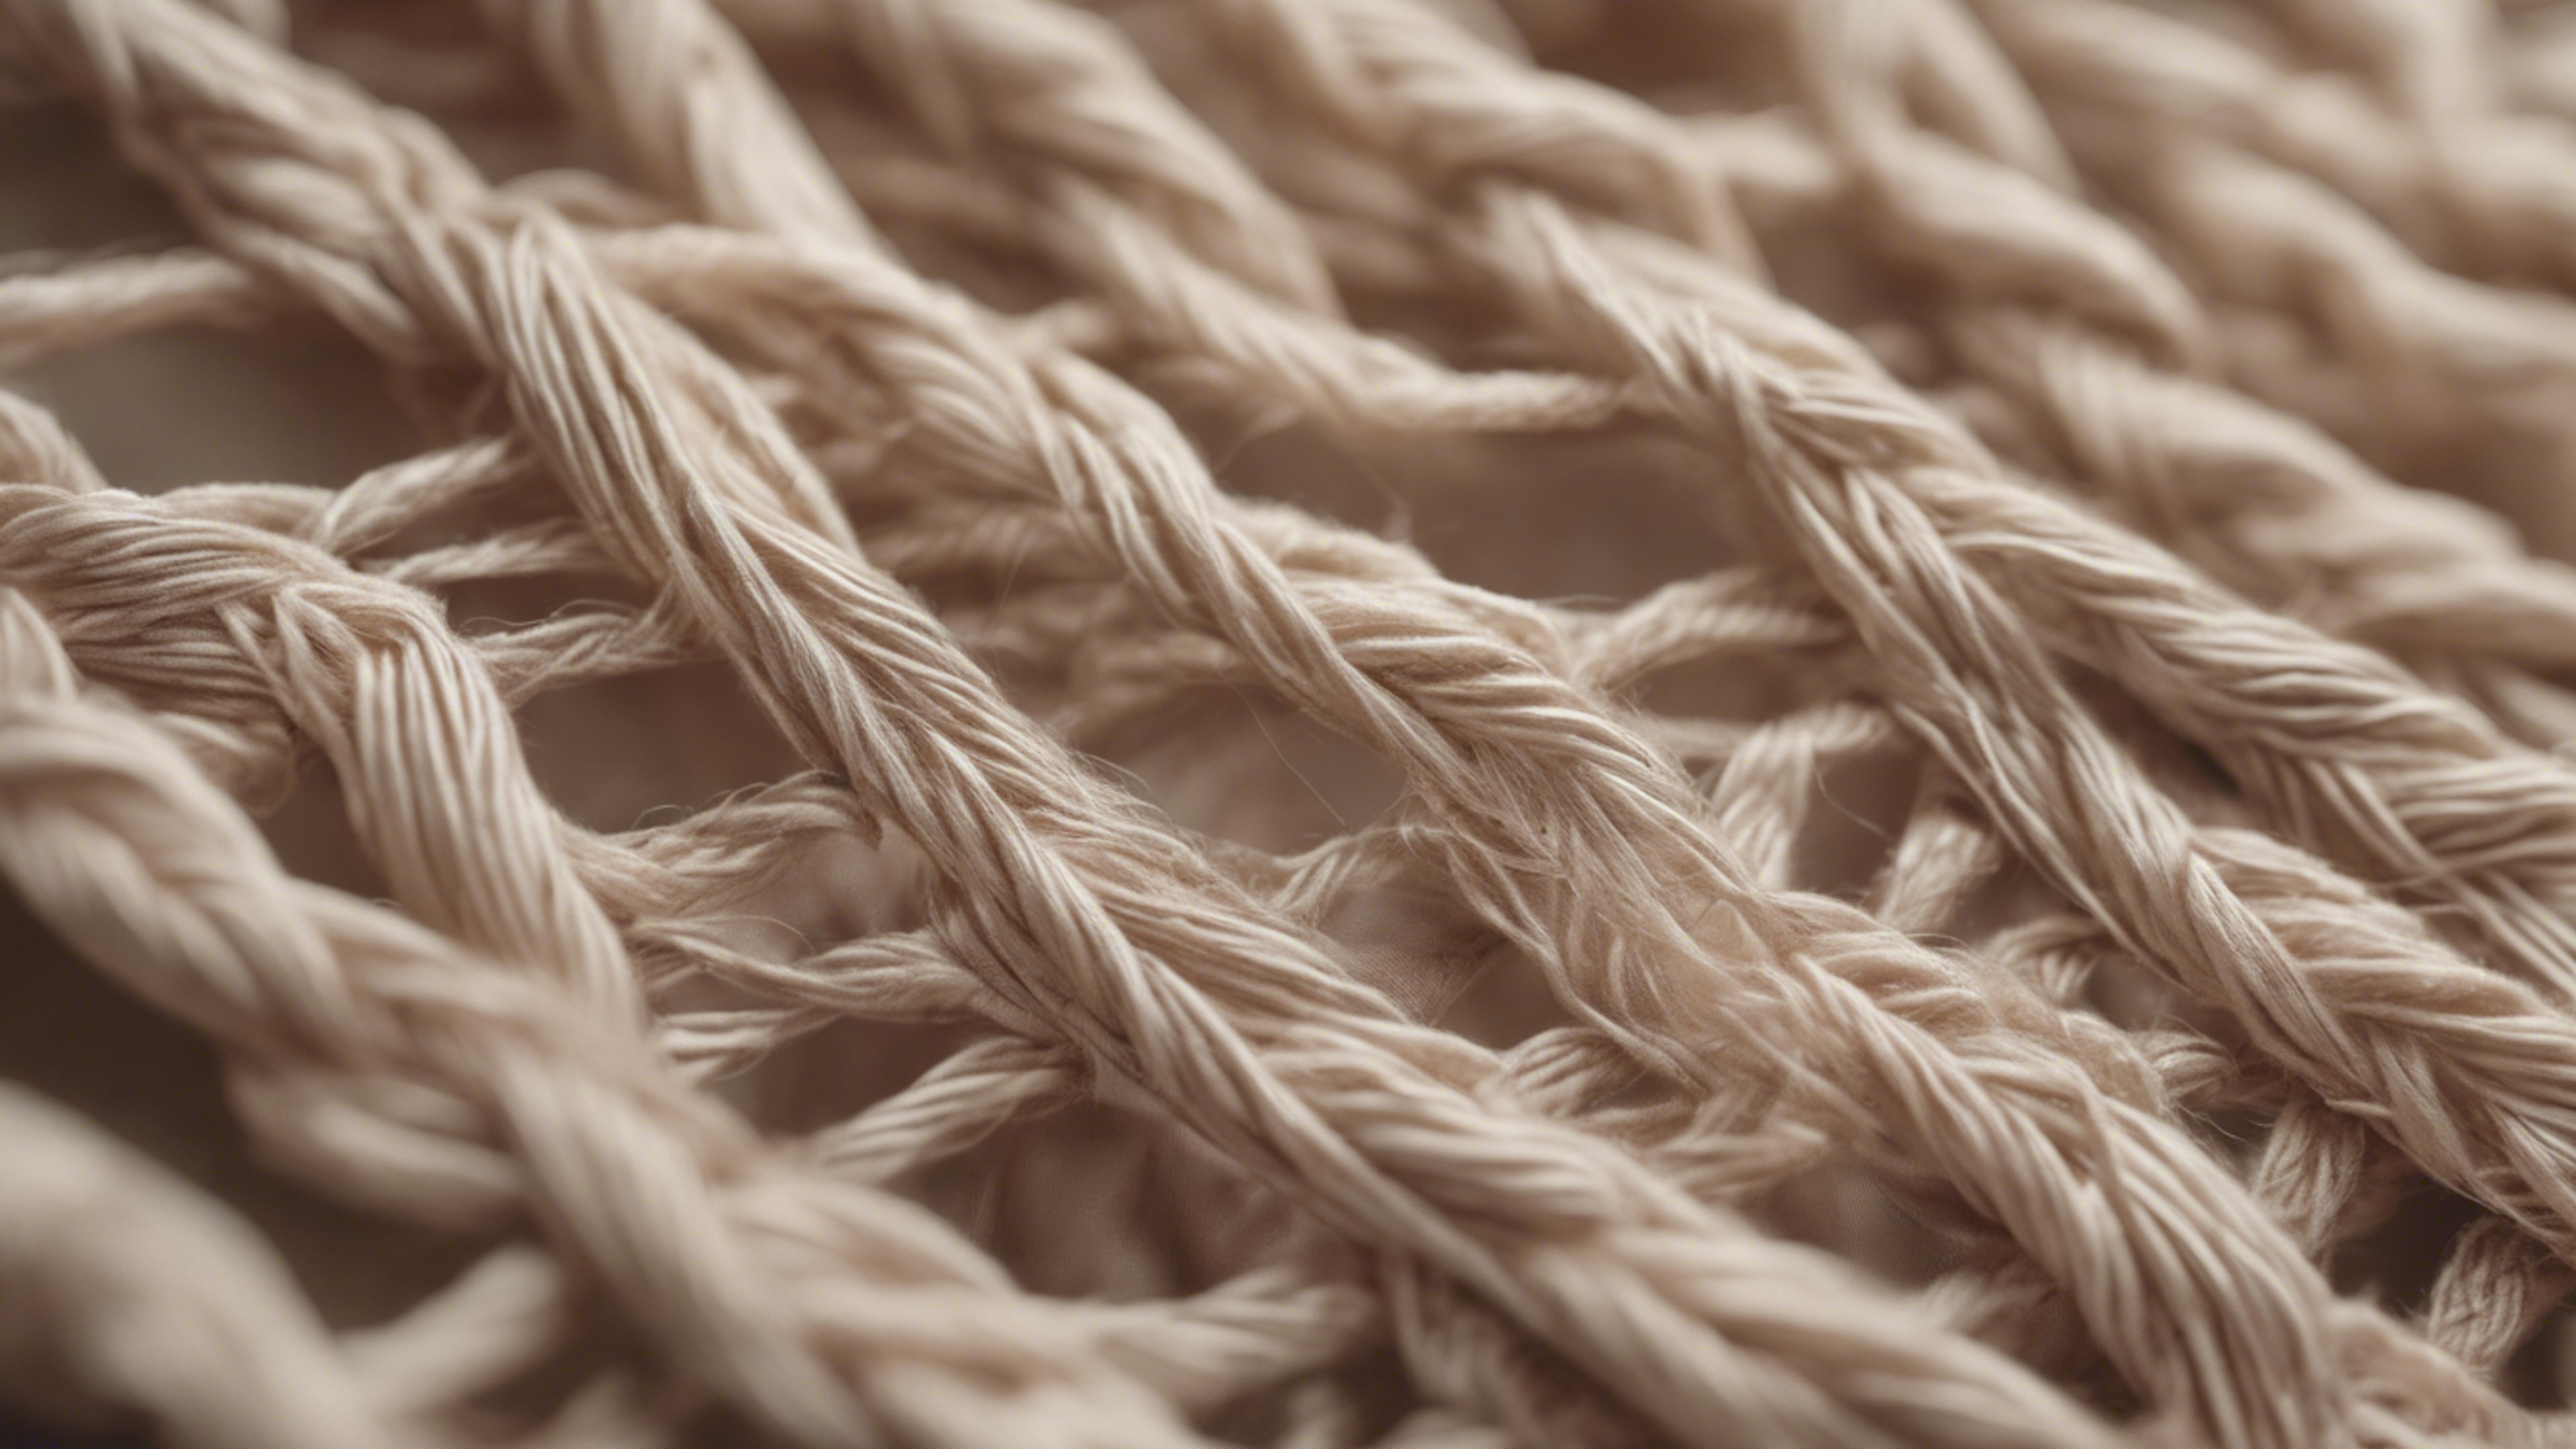 A close-up of cool beige threads interweaving to form a unique, patterned fabric. Wallpaper[e47f0bd142b54d48a5a0]